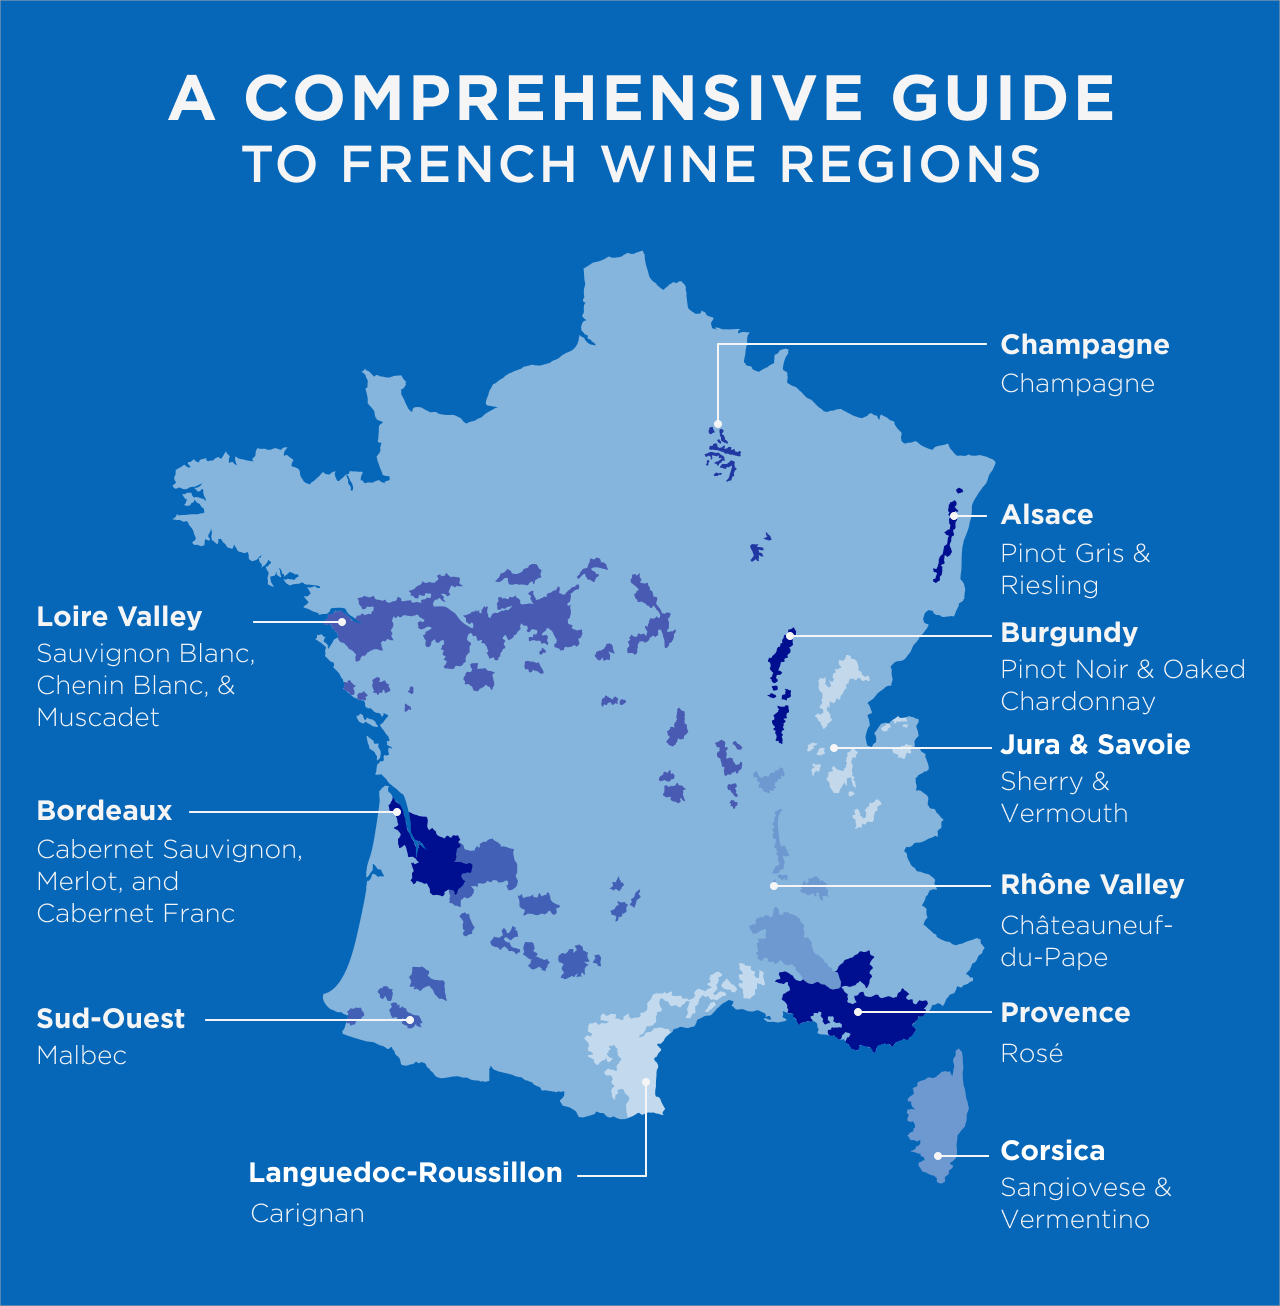 A Comprehensive Guide to French Wine Regions Infographic